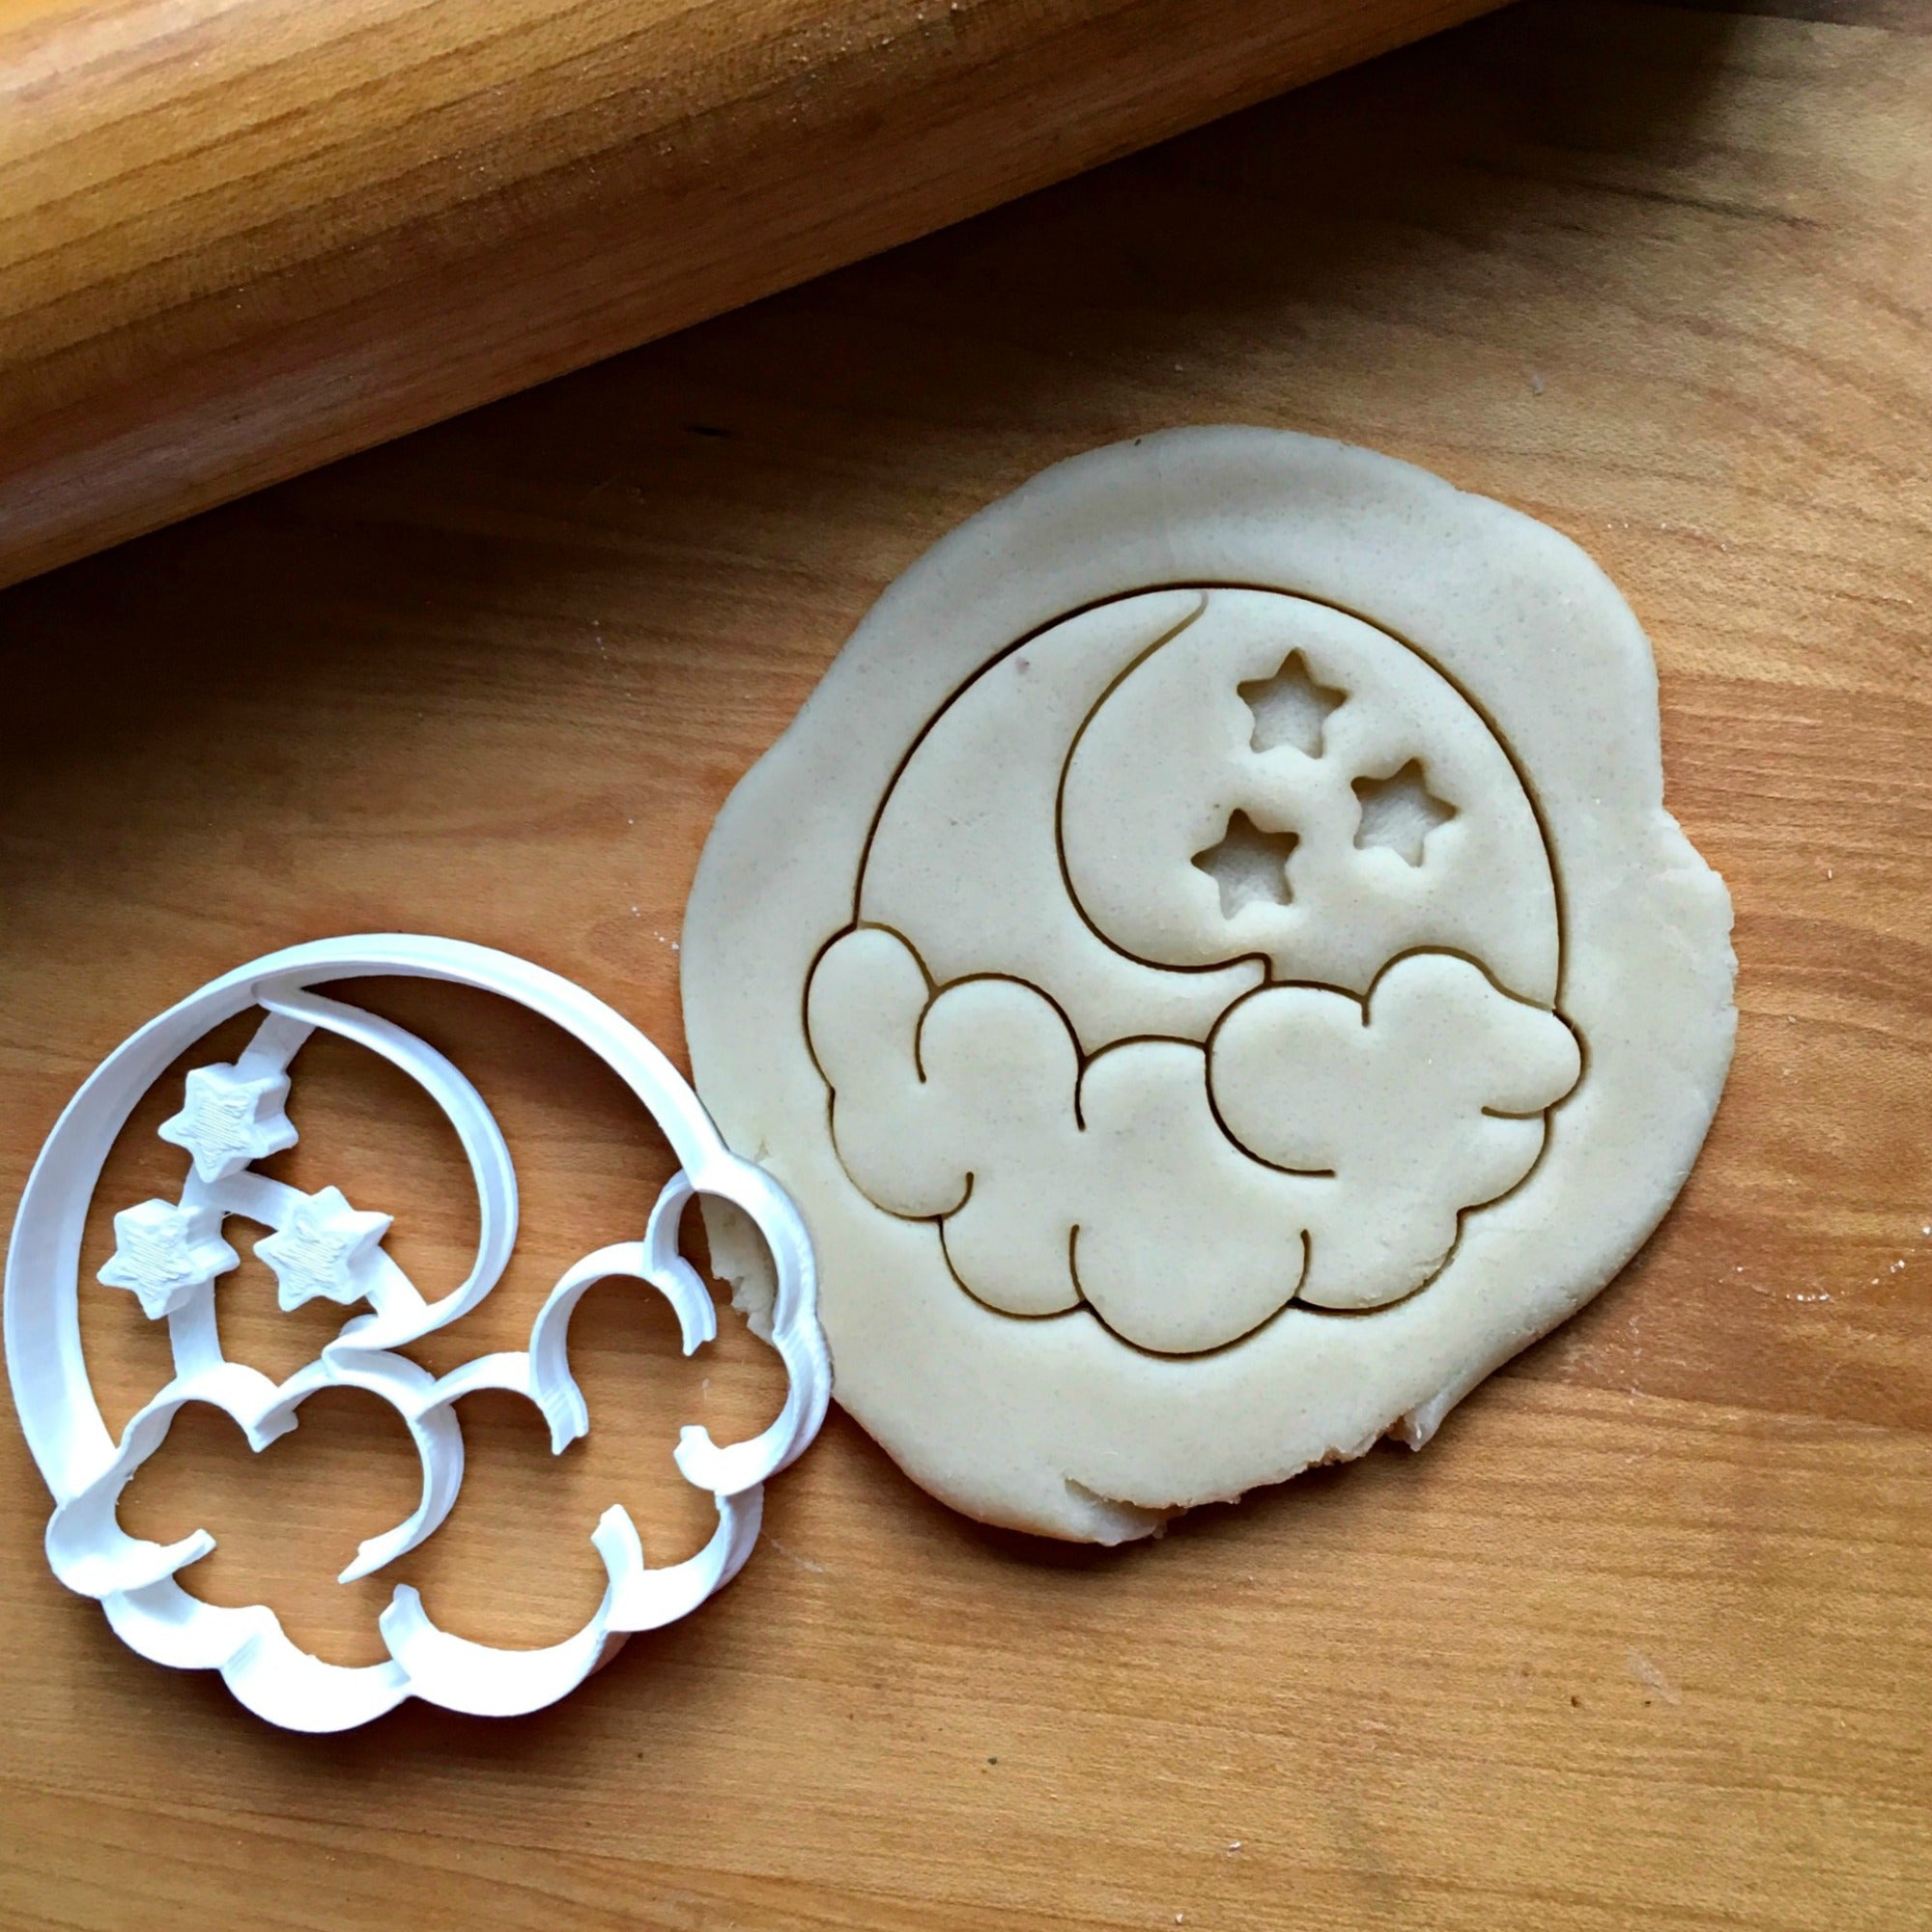 Set of 2 Cloud and Stars Cookie Cutters/Dishwasher Safe